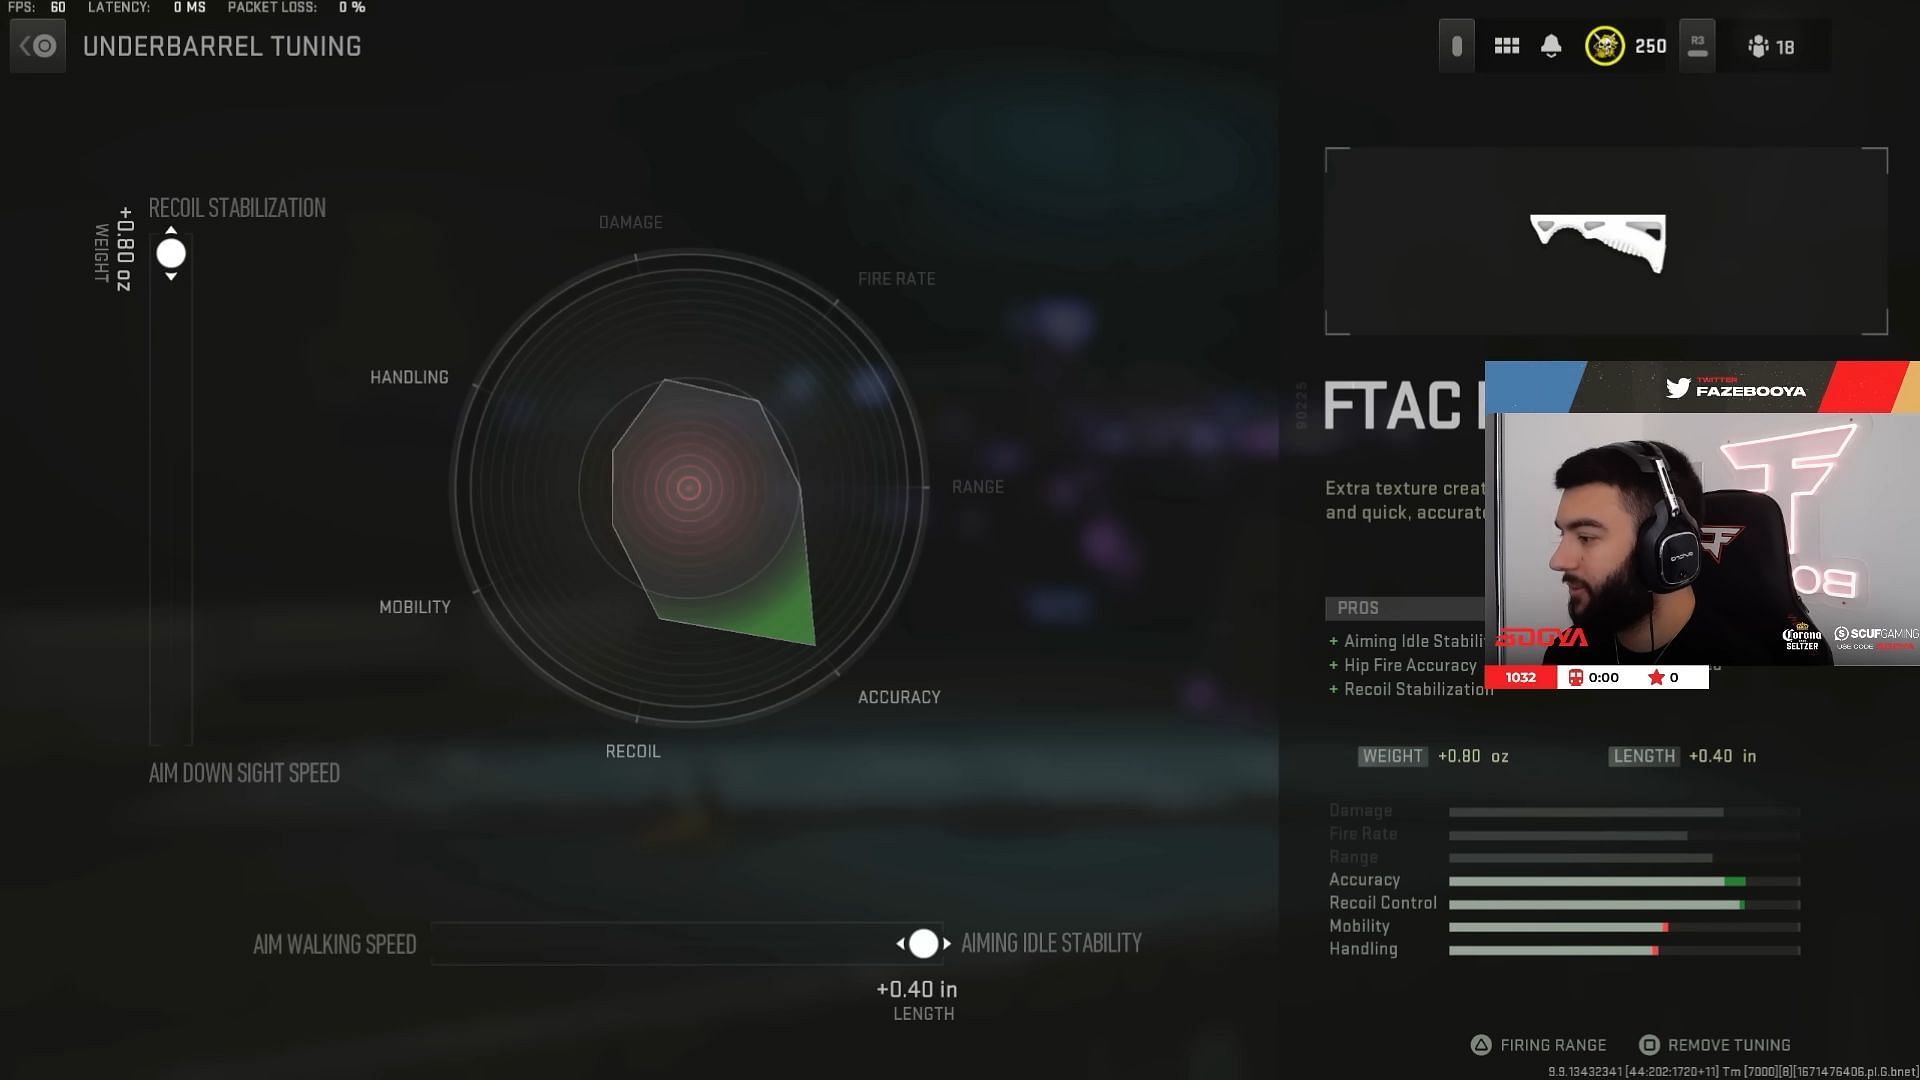 FTAC Ripper 56 tuning (Image via Activision and YouTube/Faze Booya)